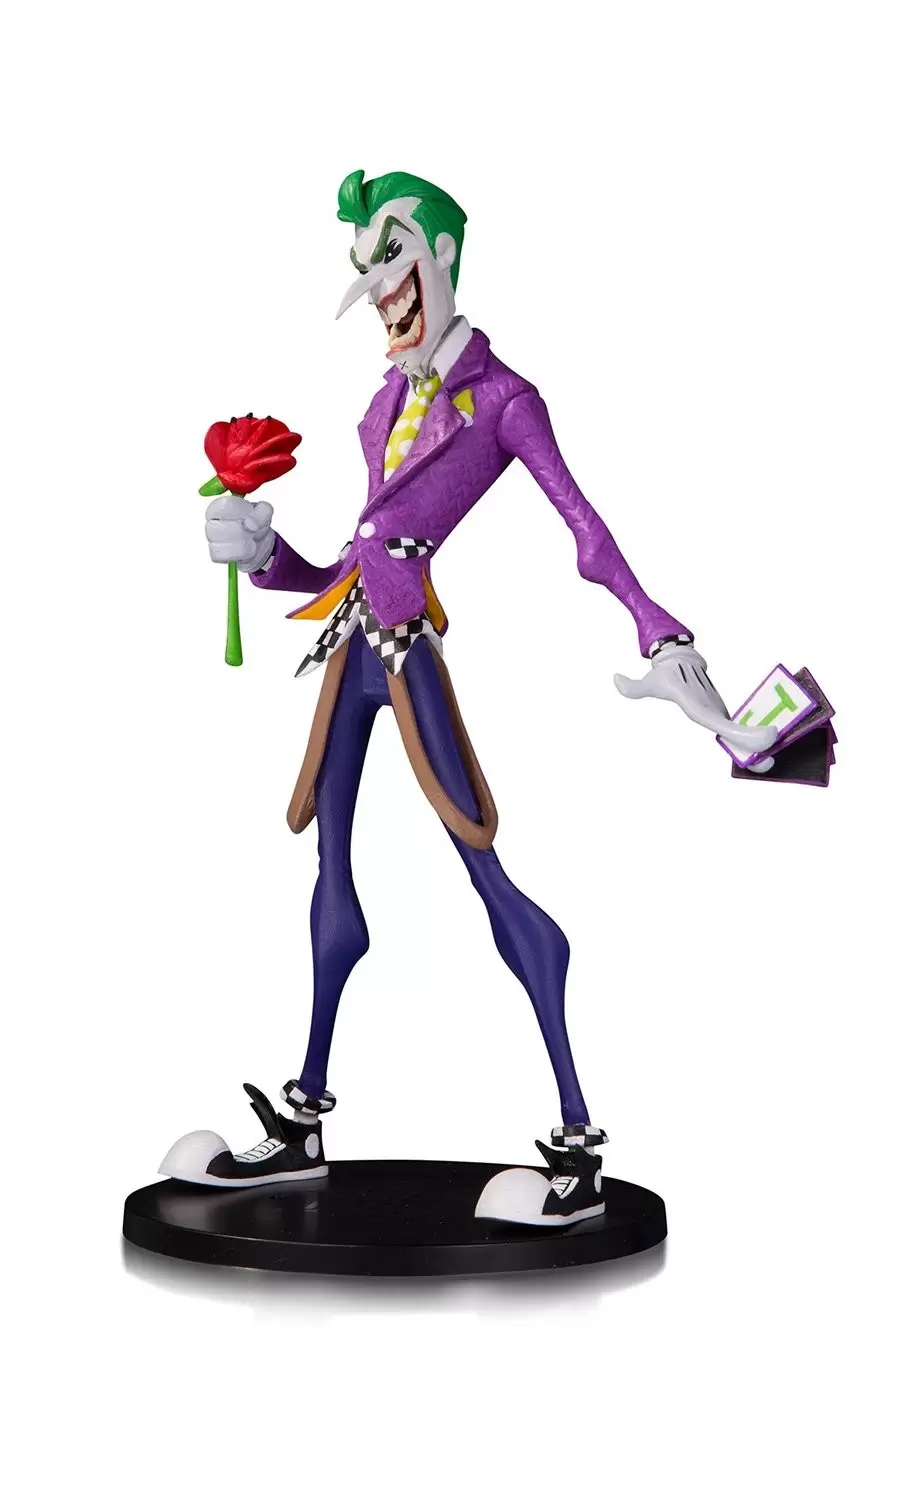 DC Artists Alley - DC Collectibles - DC Artists Alley - The Joker by Hainanu Nooligan Saulque